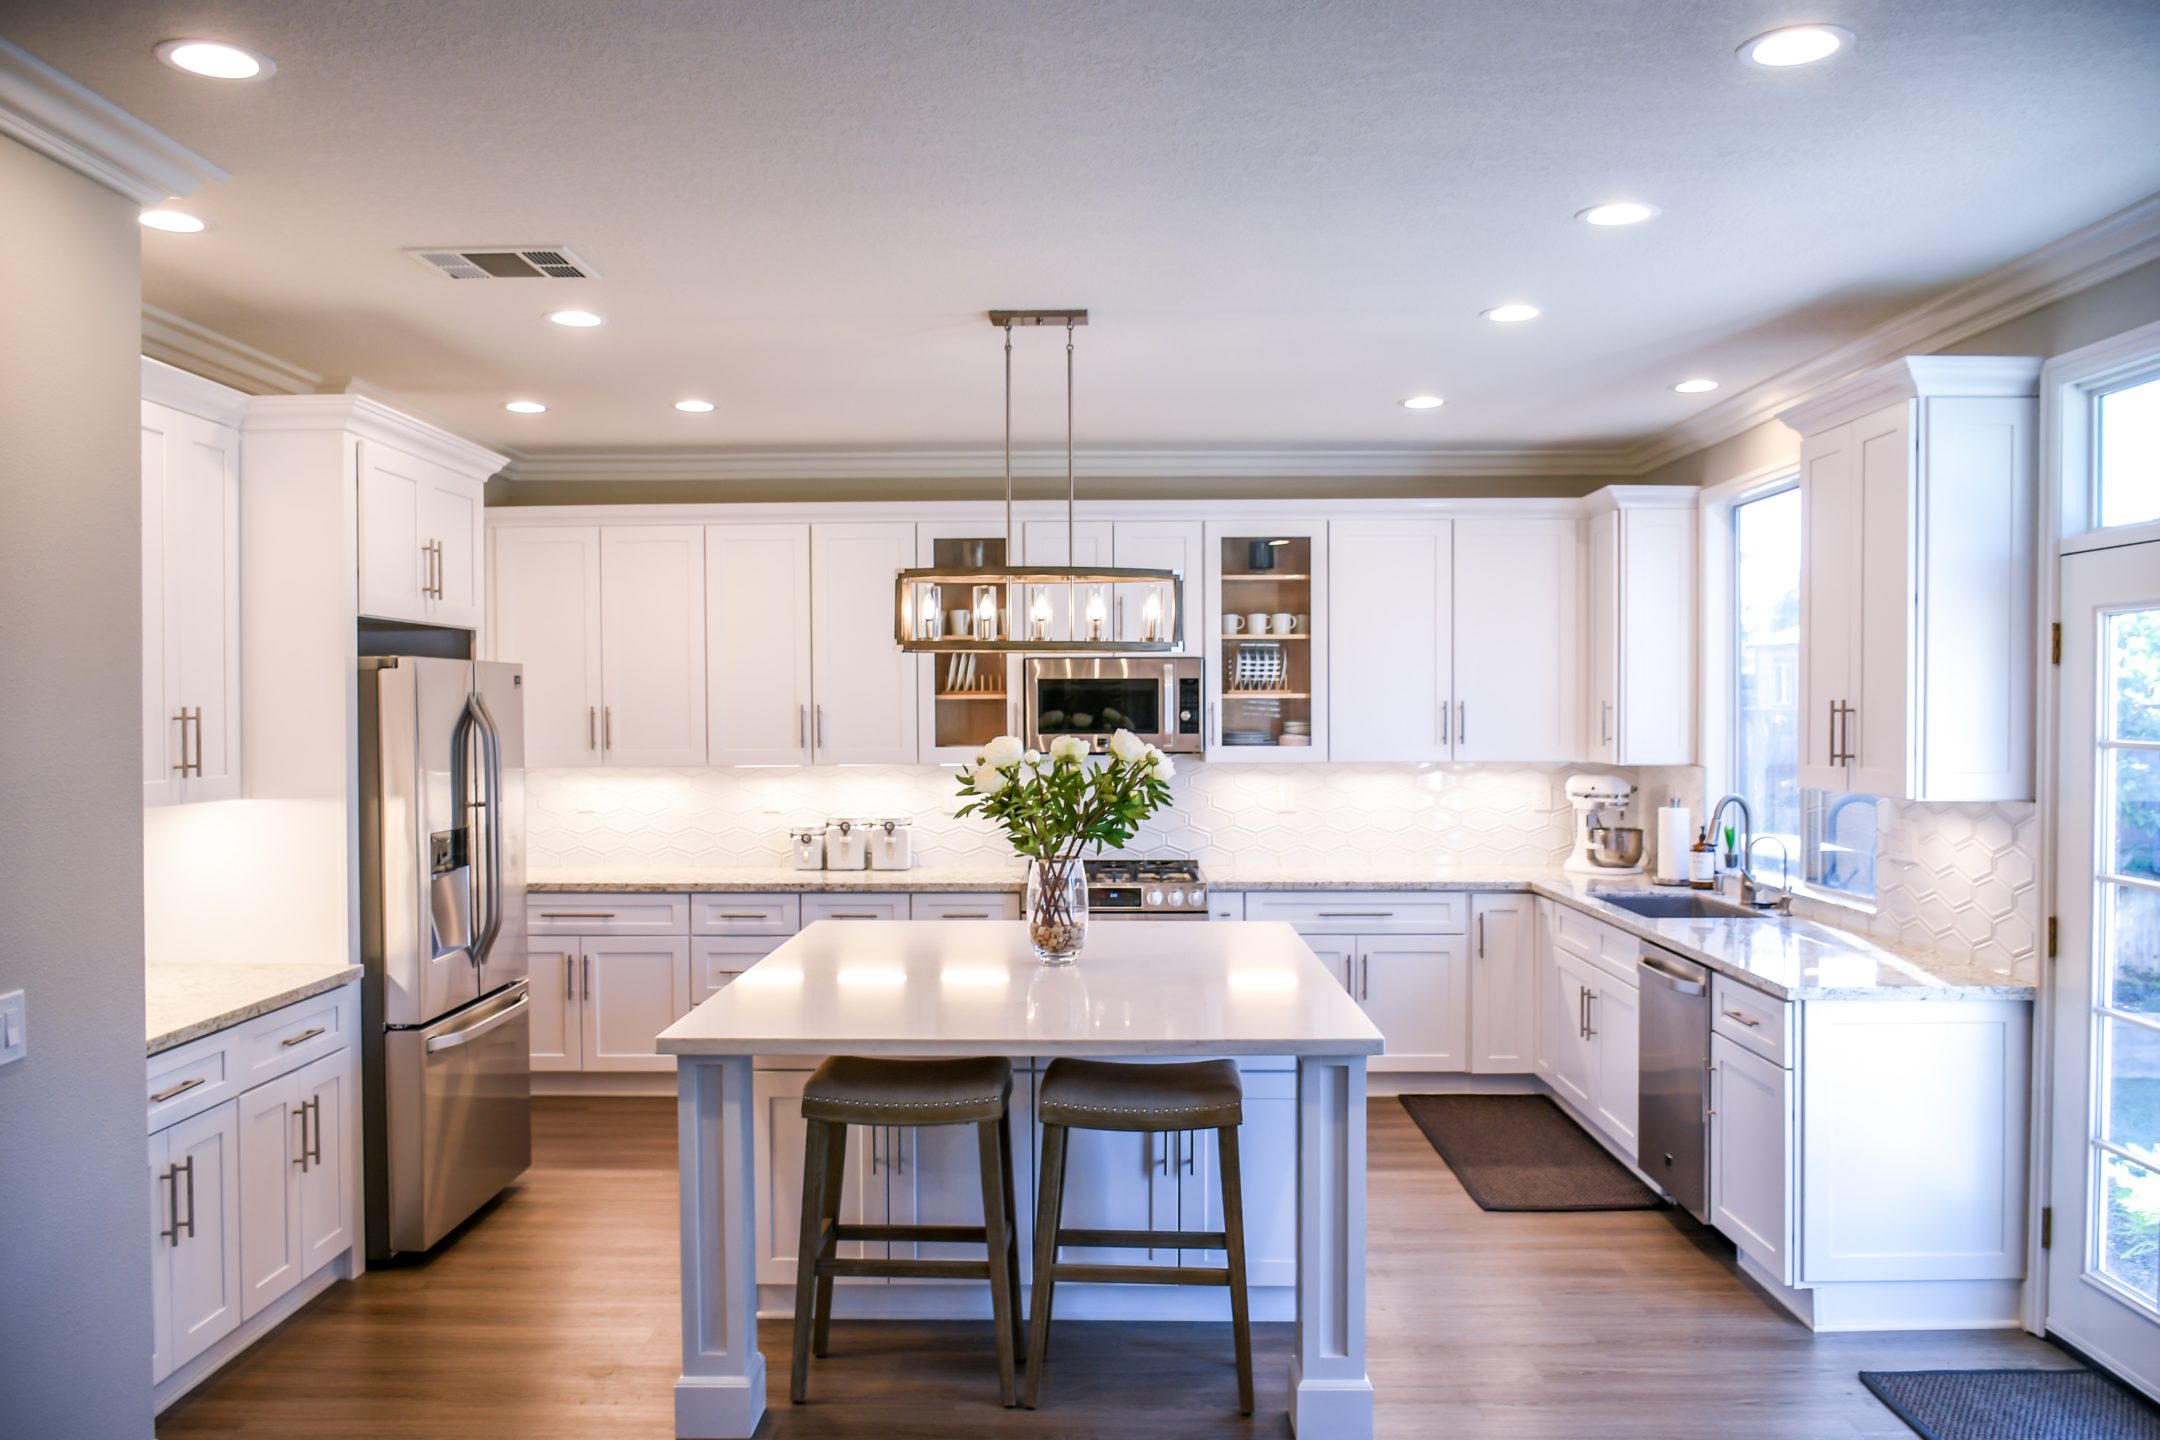 Decluttered kitchens with clean, white lines are a buyer's dream